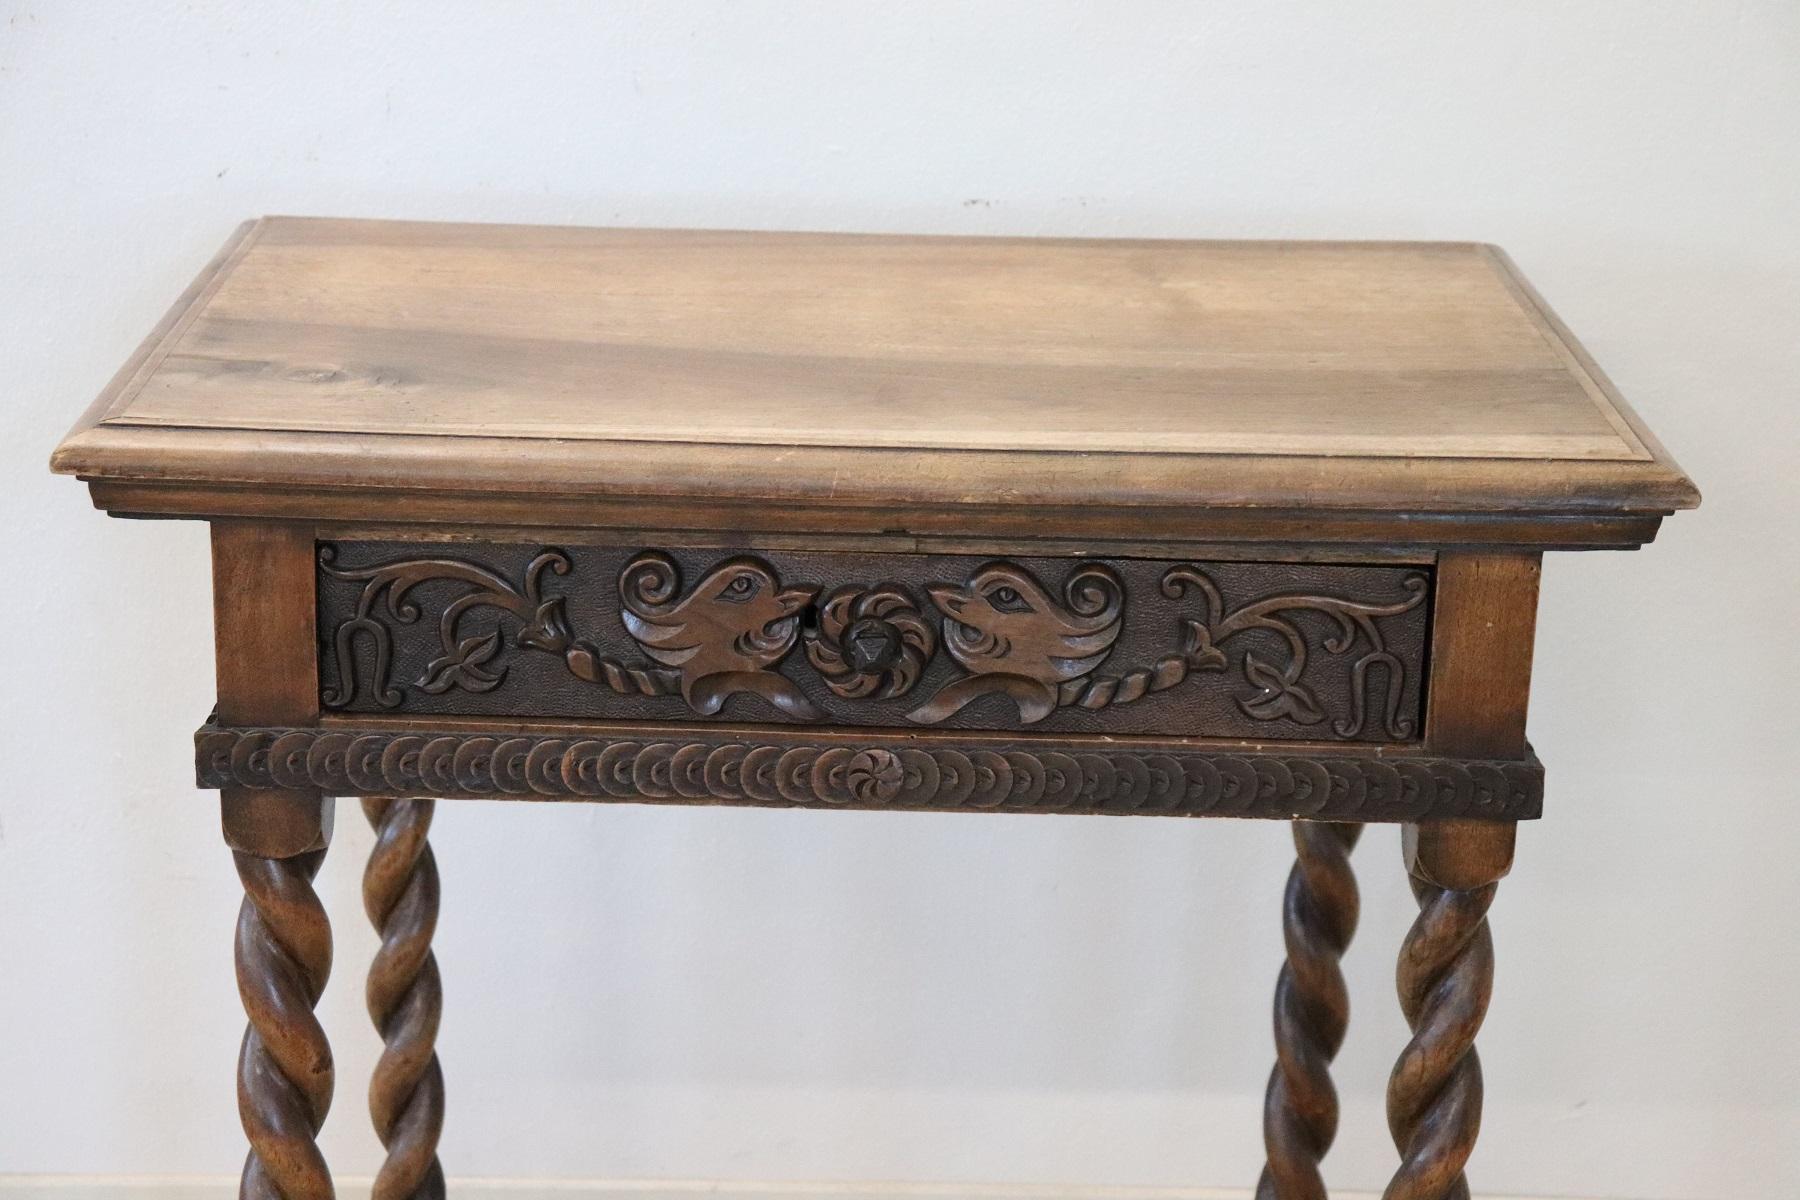 Beautiful small table in solid walnut wood. Special turned legs made of solid wood. The band has a carved wooden decoration. The decoration is present on each side of the table so it is also nice positioned in the center of the room. On the front a